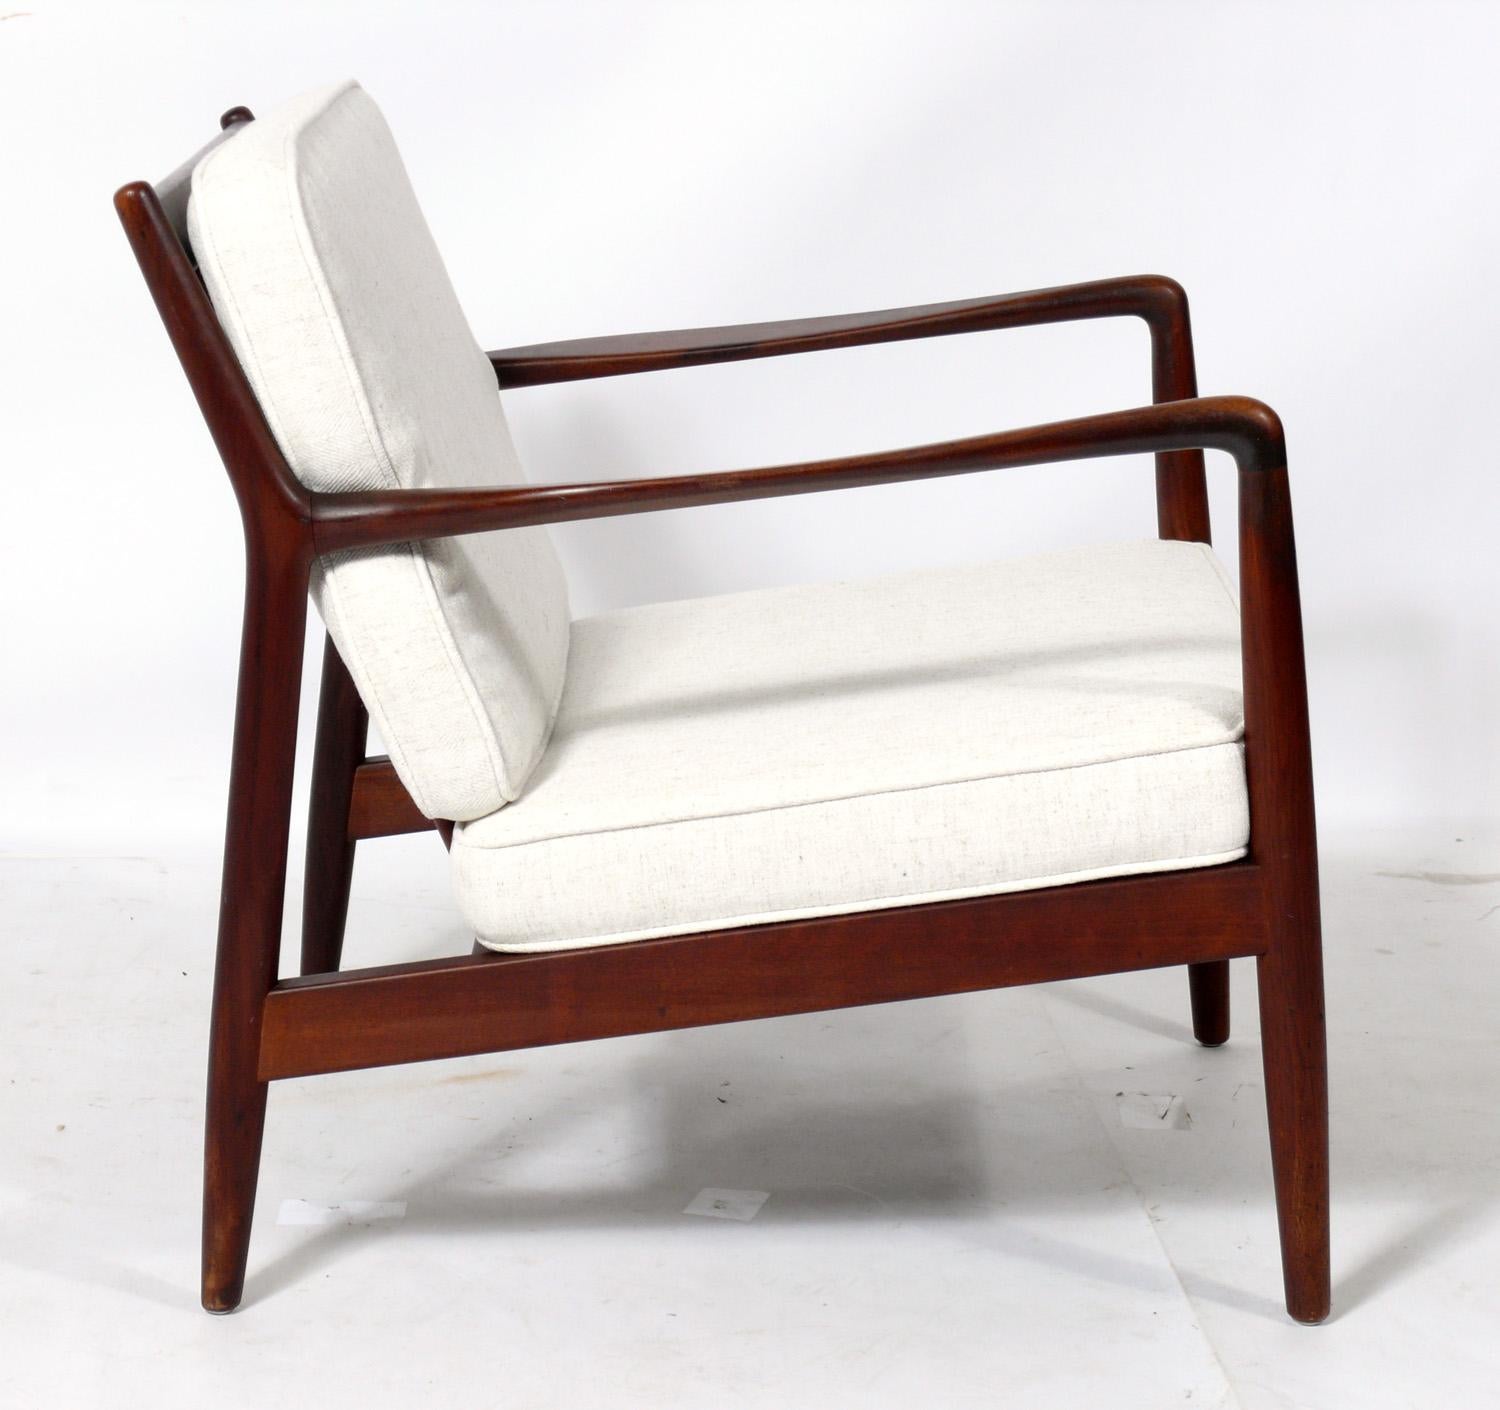 Danish modern lounge chair, designed by Folke Ohlsson for DUX, Denmark, circa 1960s. It has been reupholstered in an ivory color herringbone upholstery. The teak frame has been cleaned and Danish oiled.